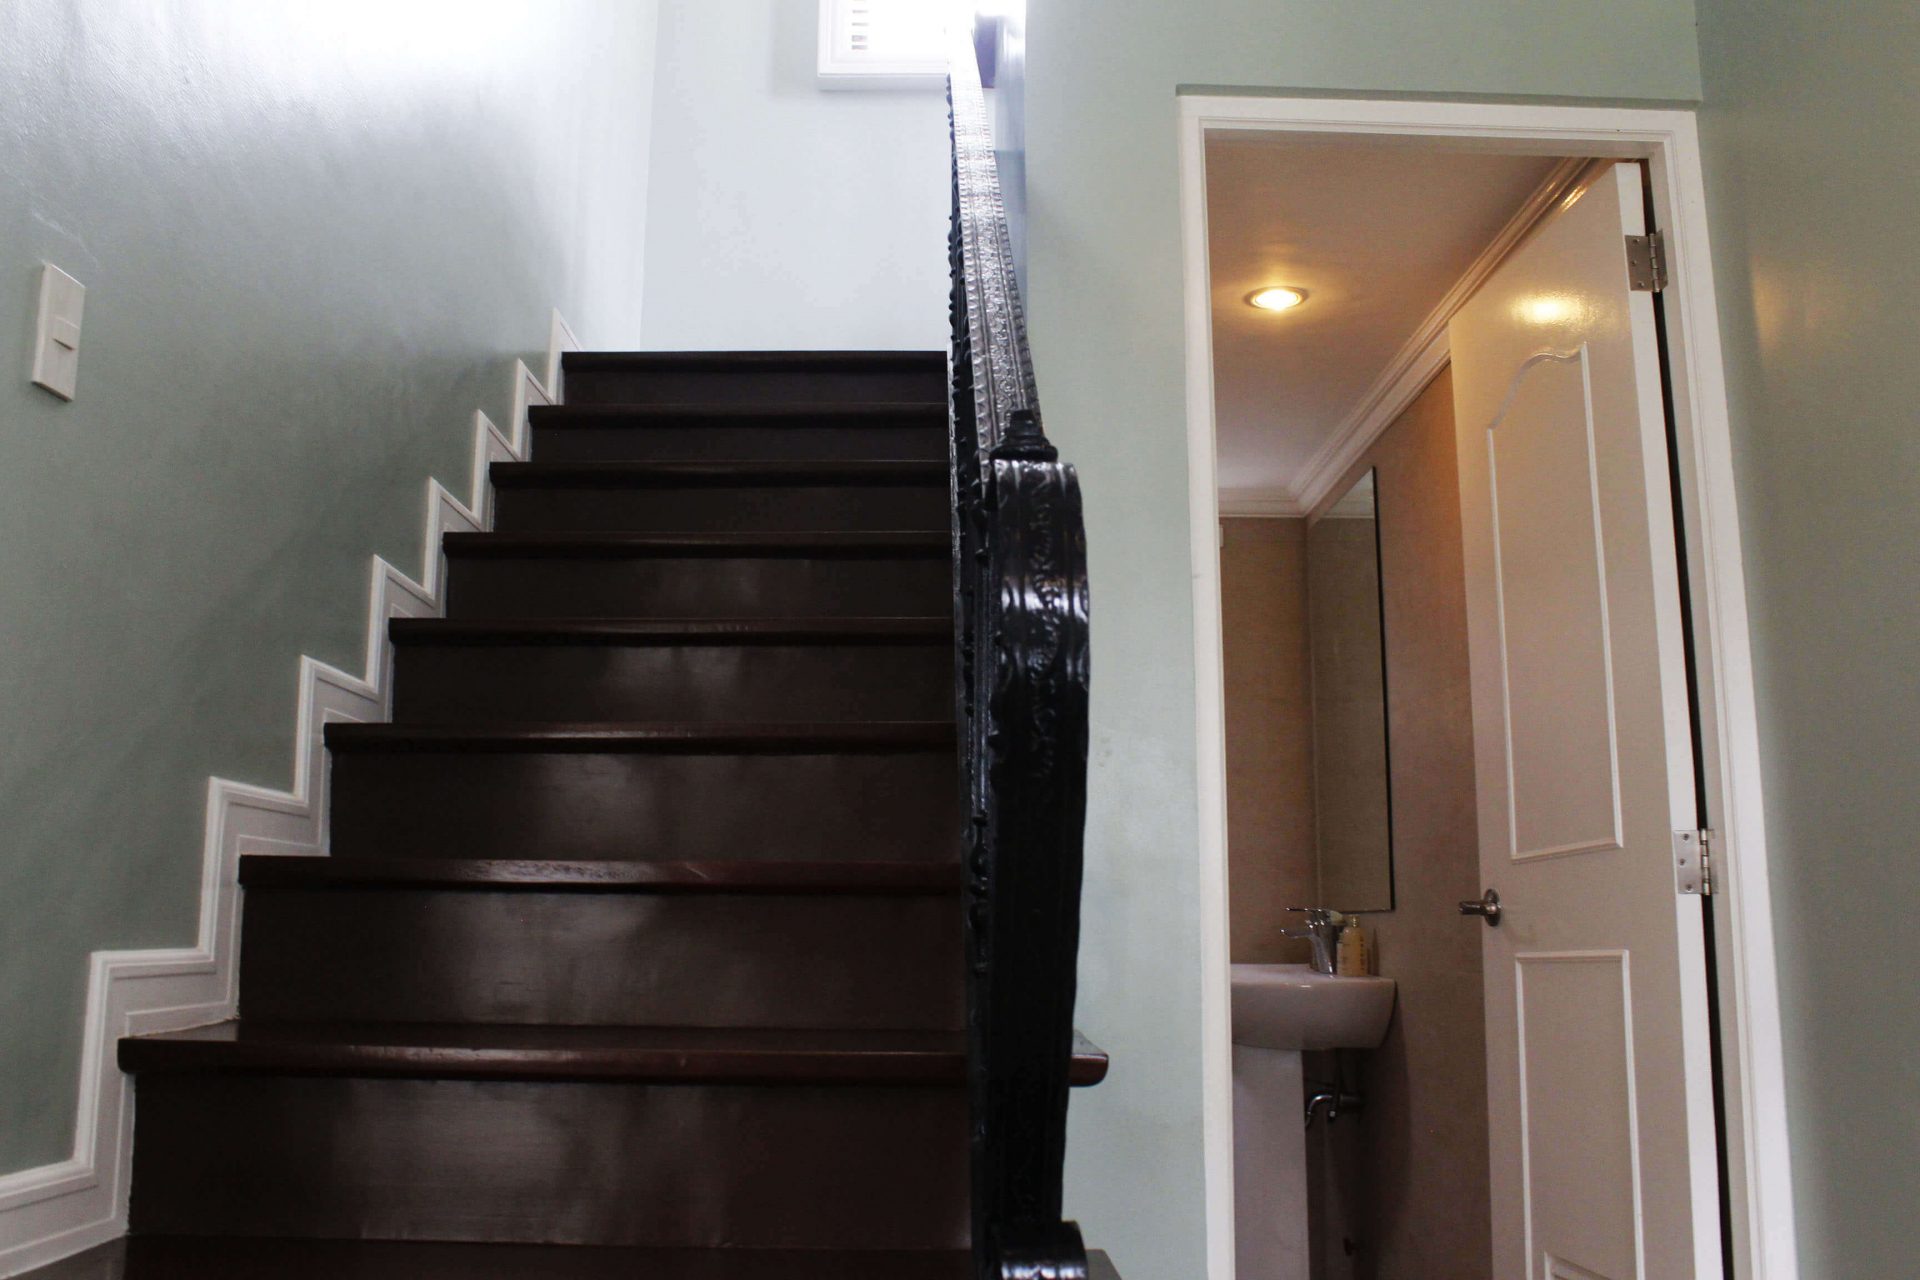 Vista Alabang | Portofino South | Leandro House Model Stairway and Bathroom Door | Luxury Homes by Brittany Corporation